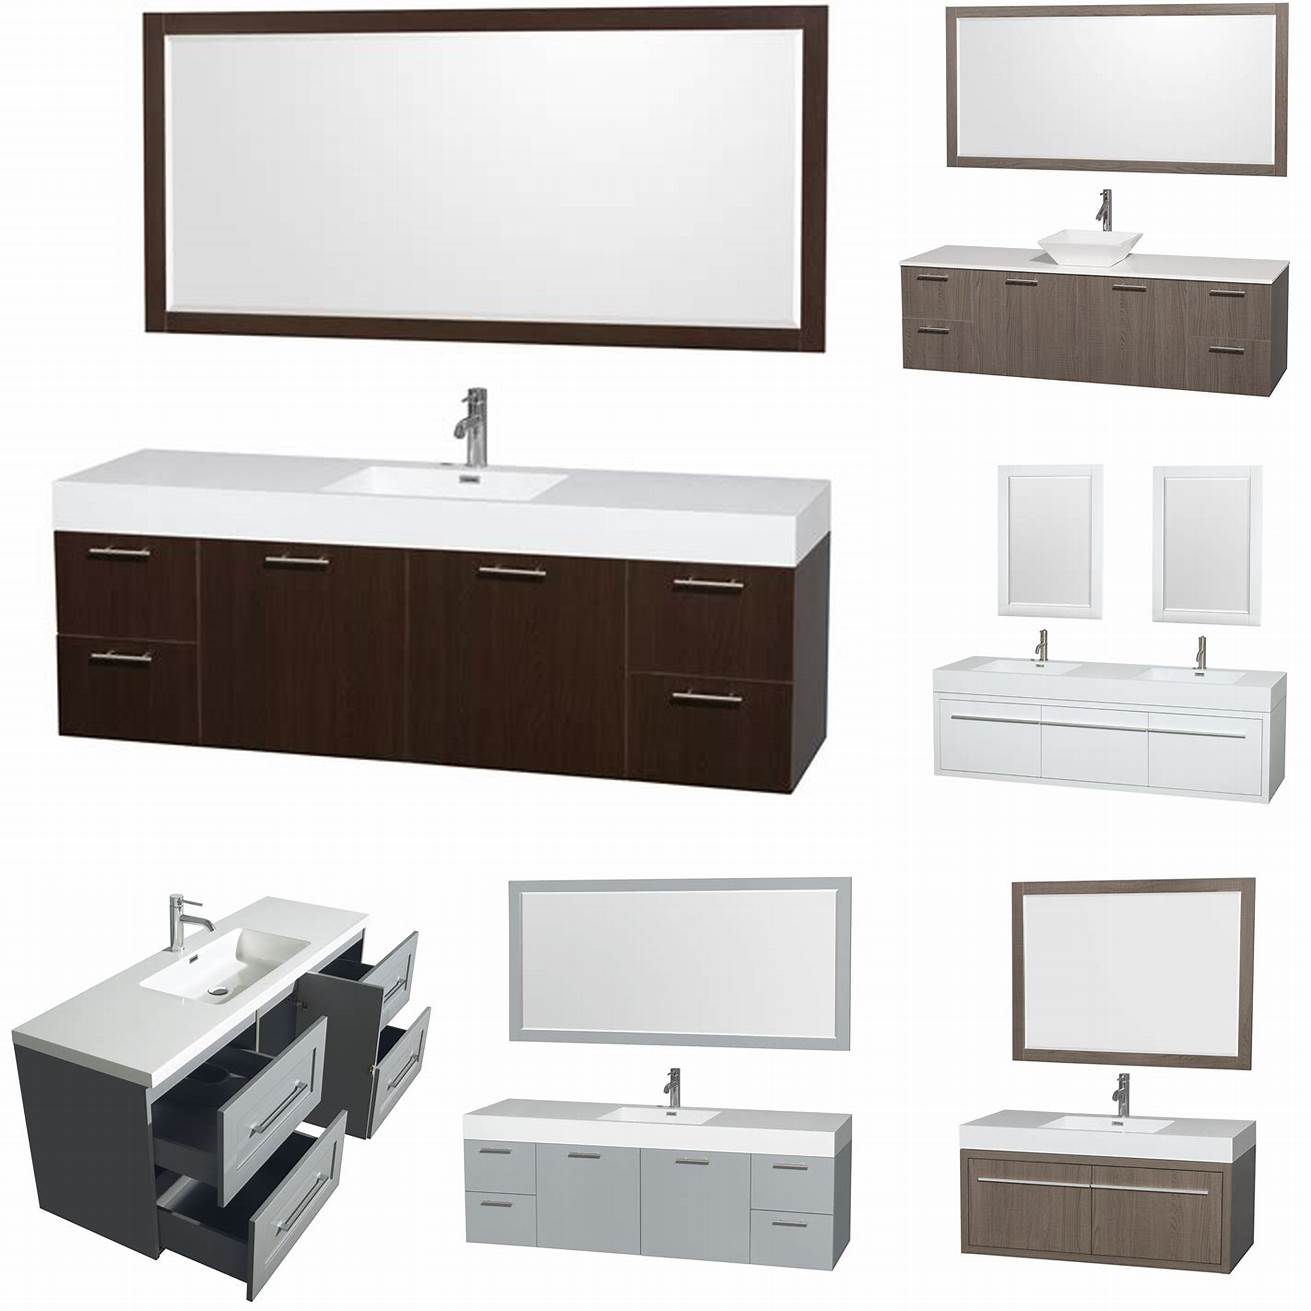 Wyndham Bathroom Vanity with a wall-mounted faucet